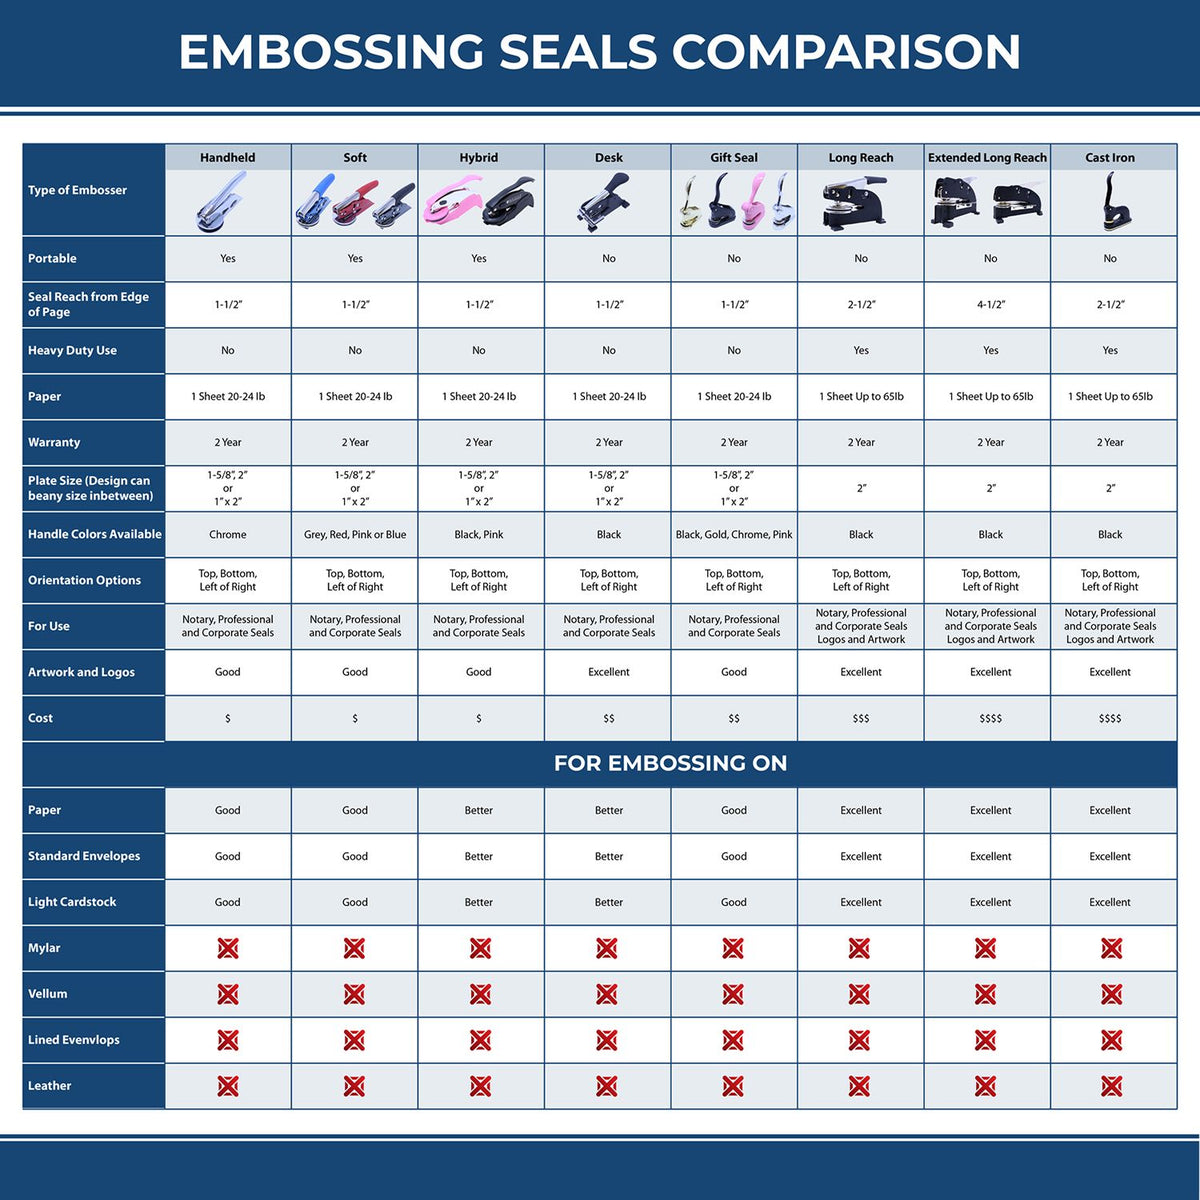 A comparison chart for the different types of mount models available for the Gift Delaware Architect Seal